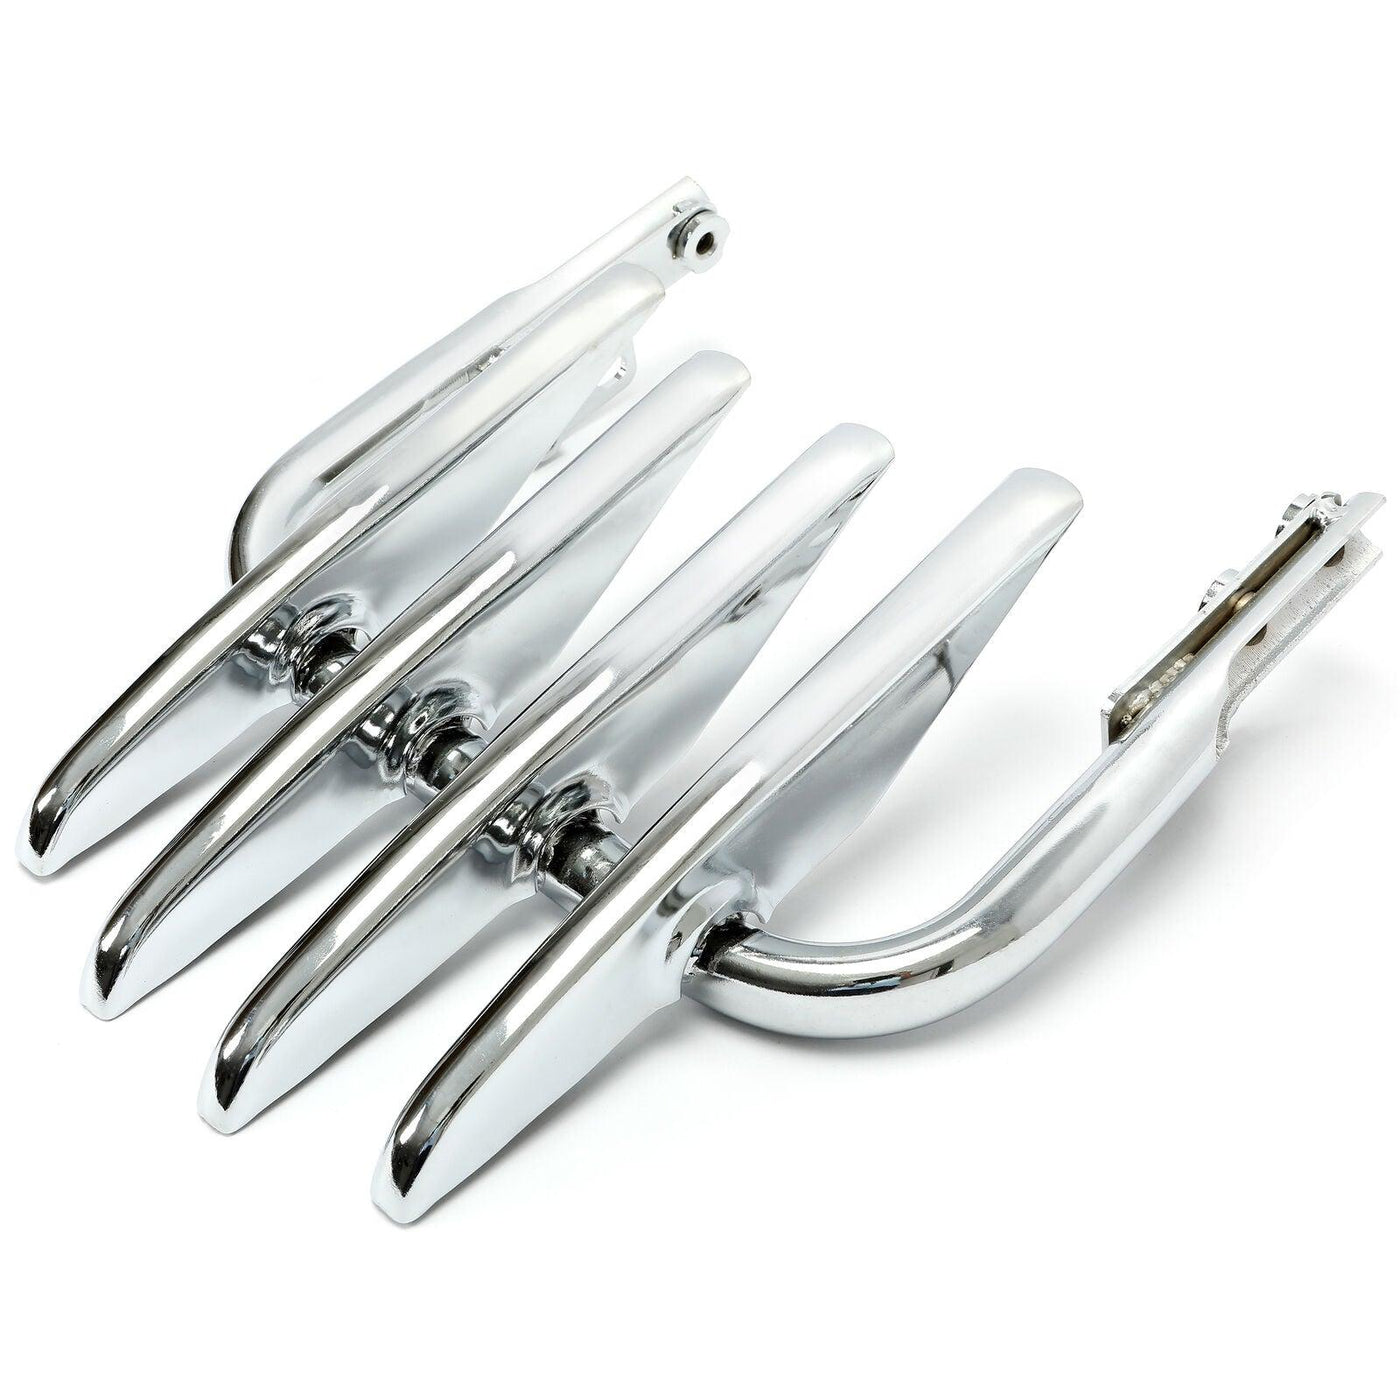 Chrome Stealth Luggage Rack for Harley Electra Street Glide Road King FLHX FLHT - Moto Life Products